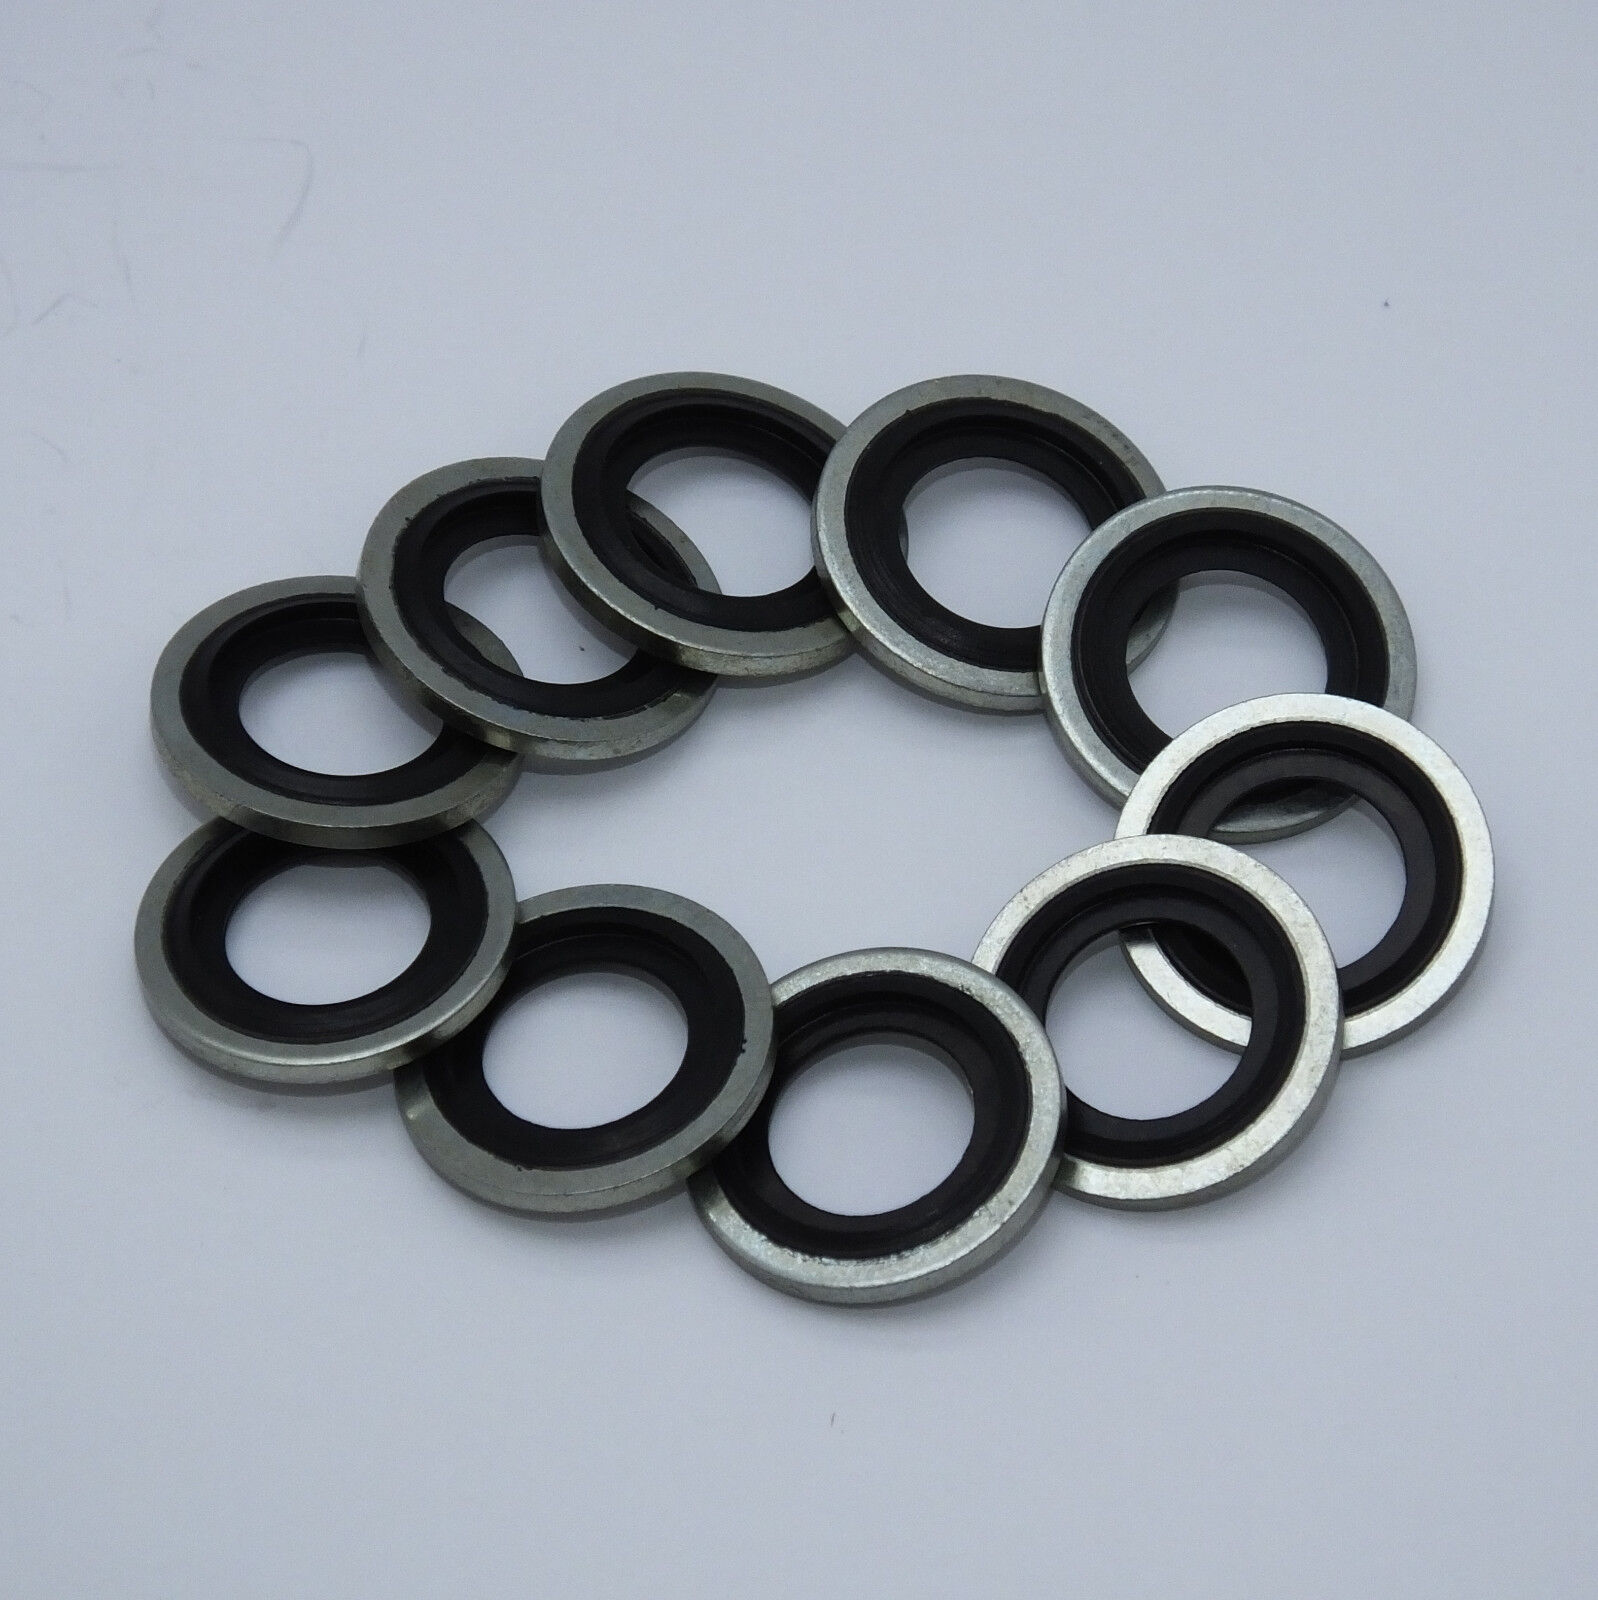 Dowty Washer 12mm M12 Spare Replacement gasket (10-pack R/M) Fits PSR0103